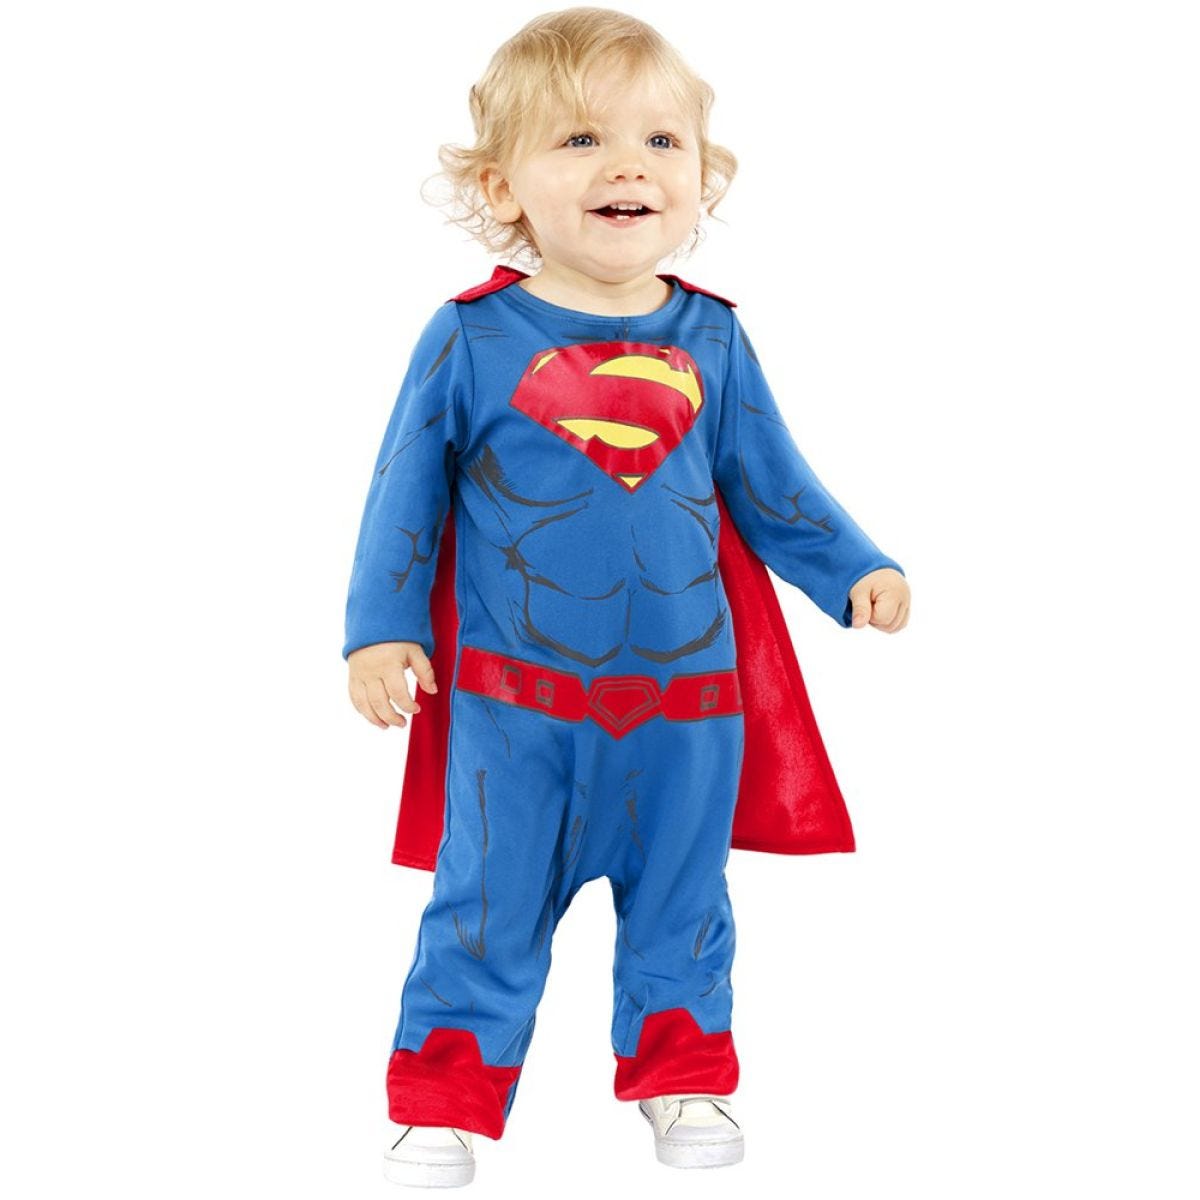 Superman - Baby and Toddler Costume